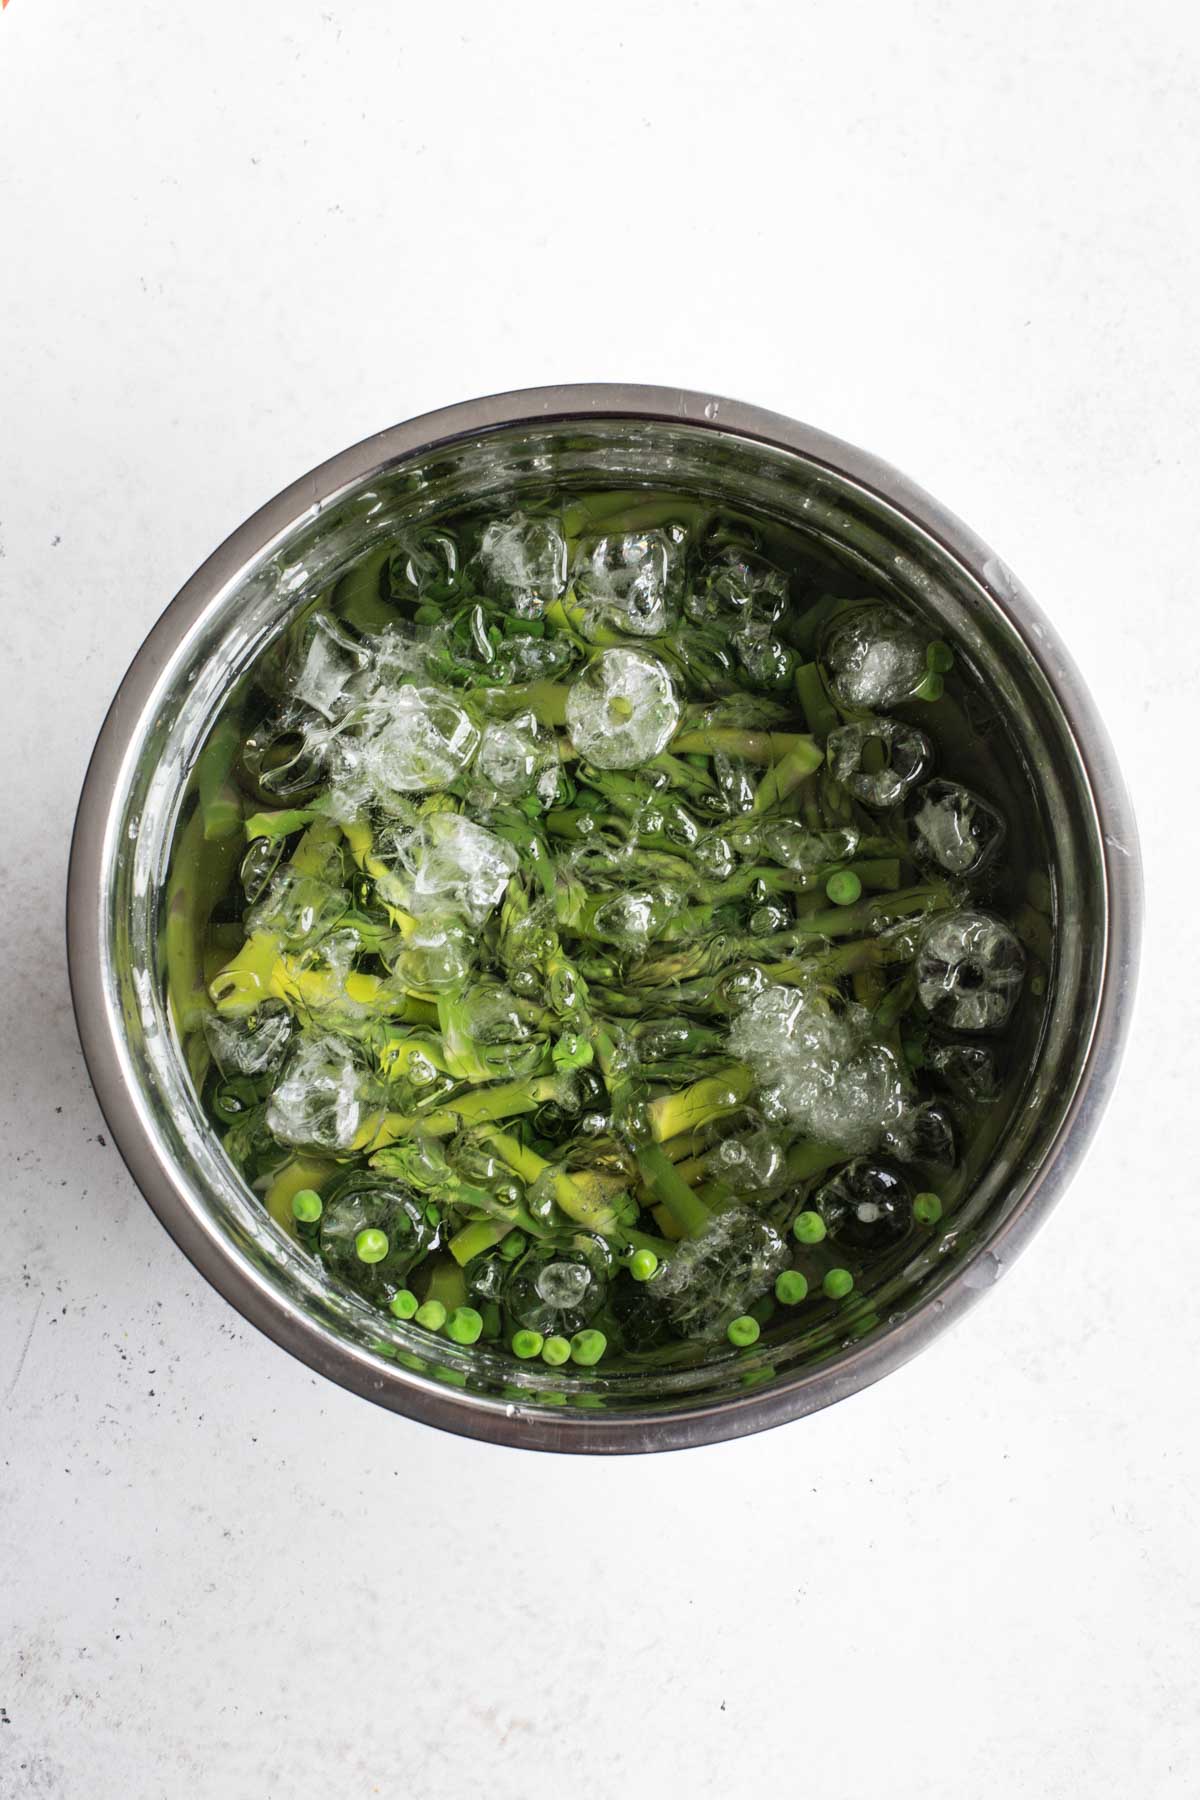 Blanched peas and asparagus in an ice bath.